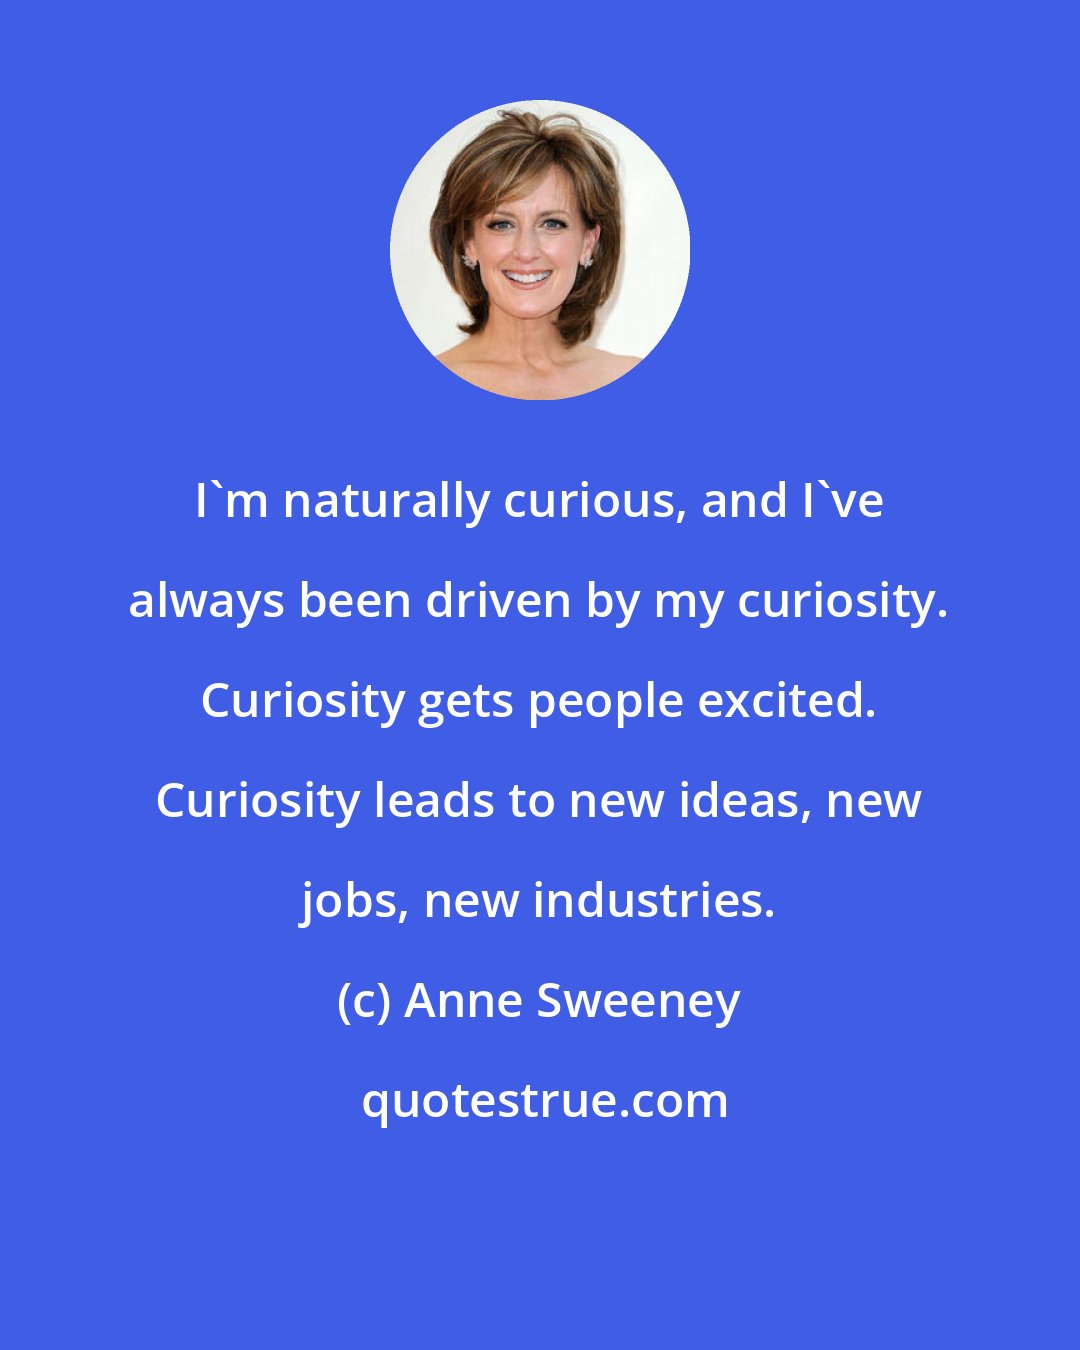 Anne Sweeney: I'm naturally curious, and I've always been driven by my curiosity. Curiosity gets people excited. Curiosity leads to new ideas, new jobs, new industries.